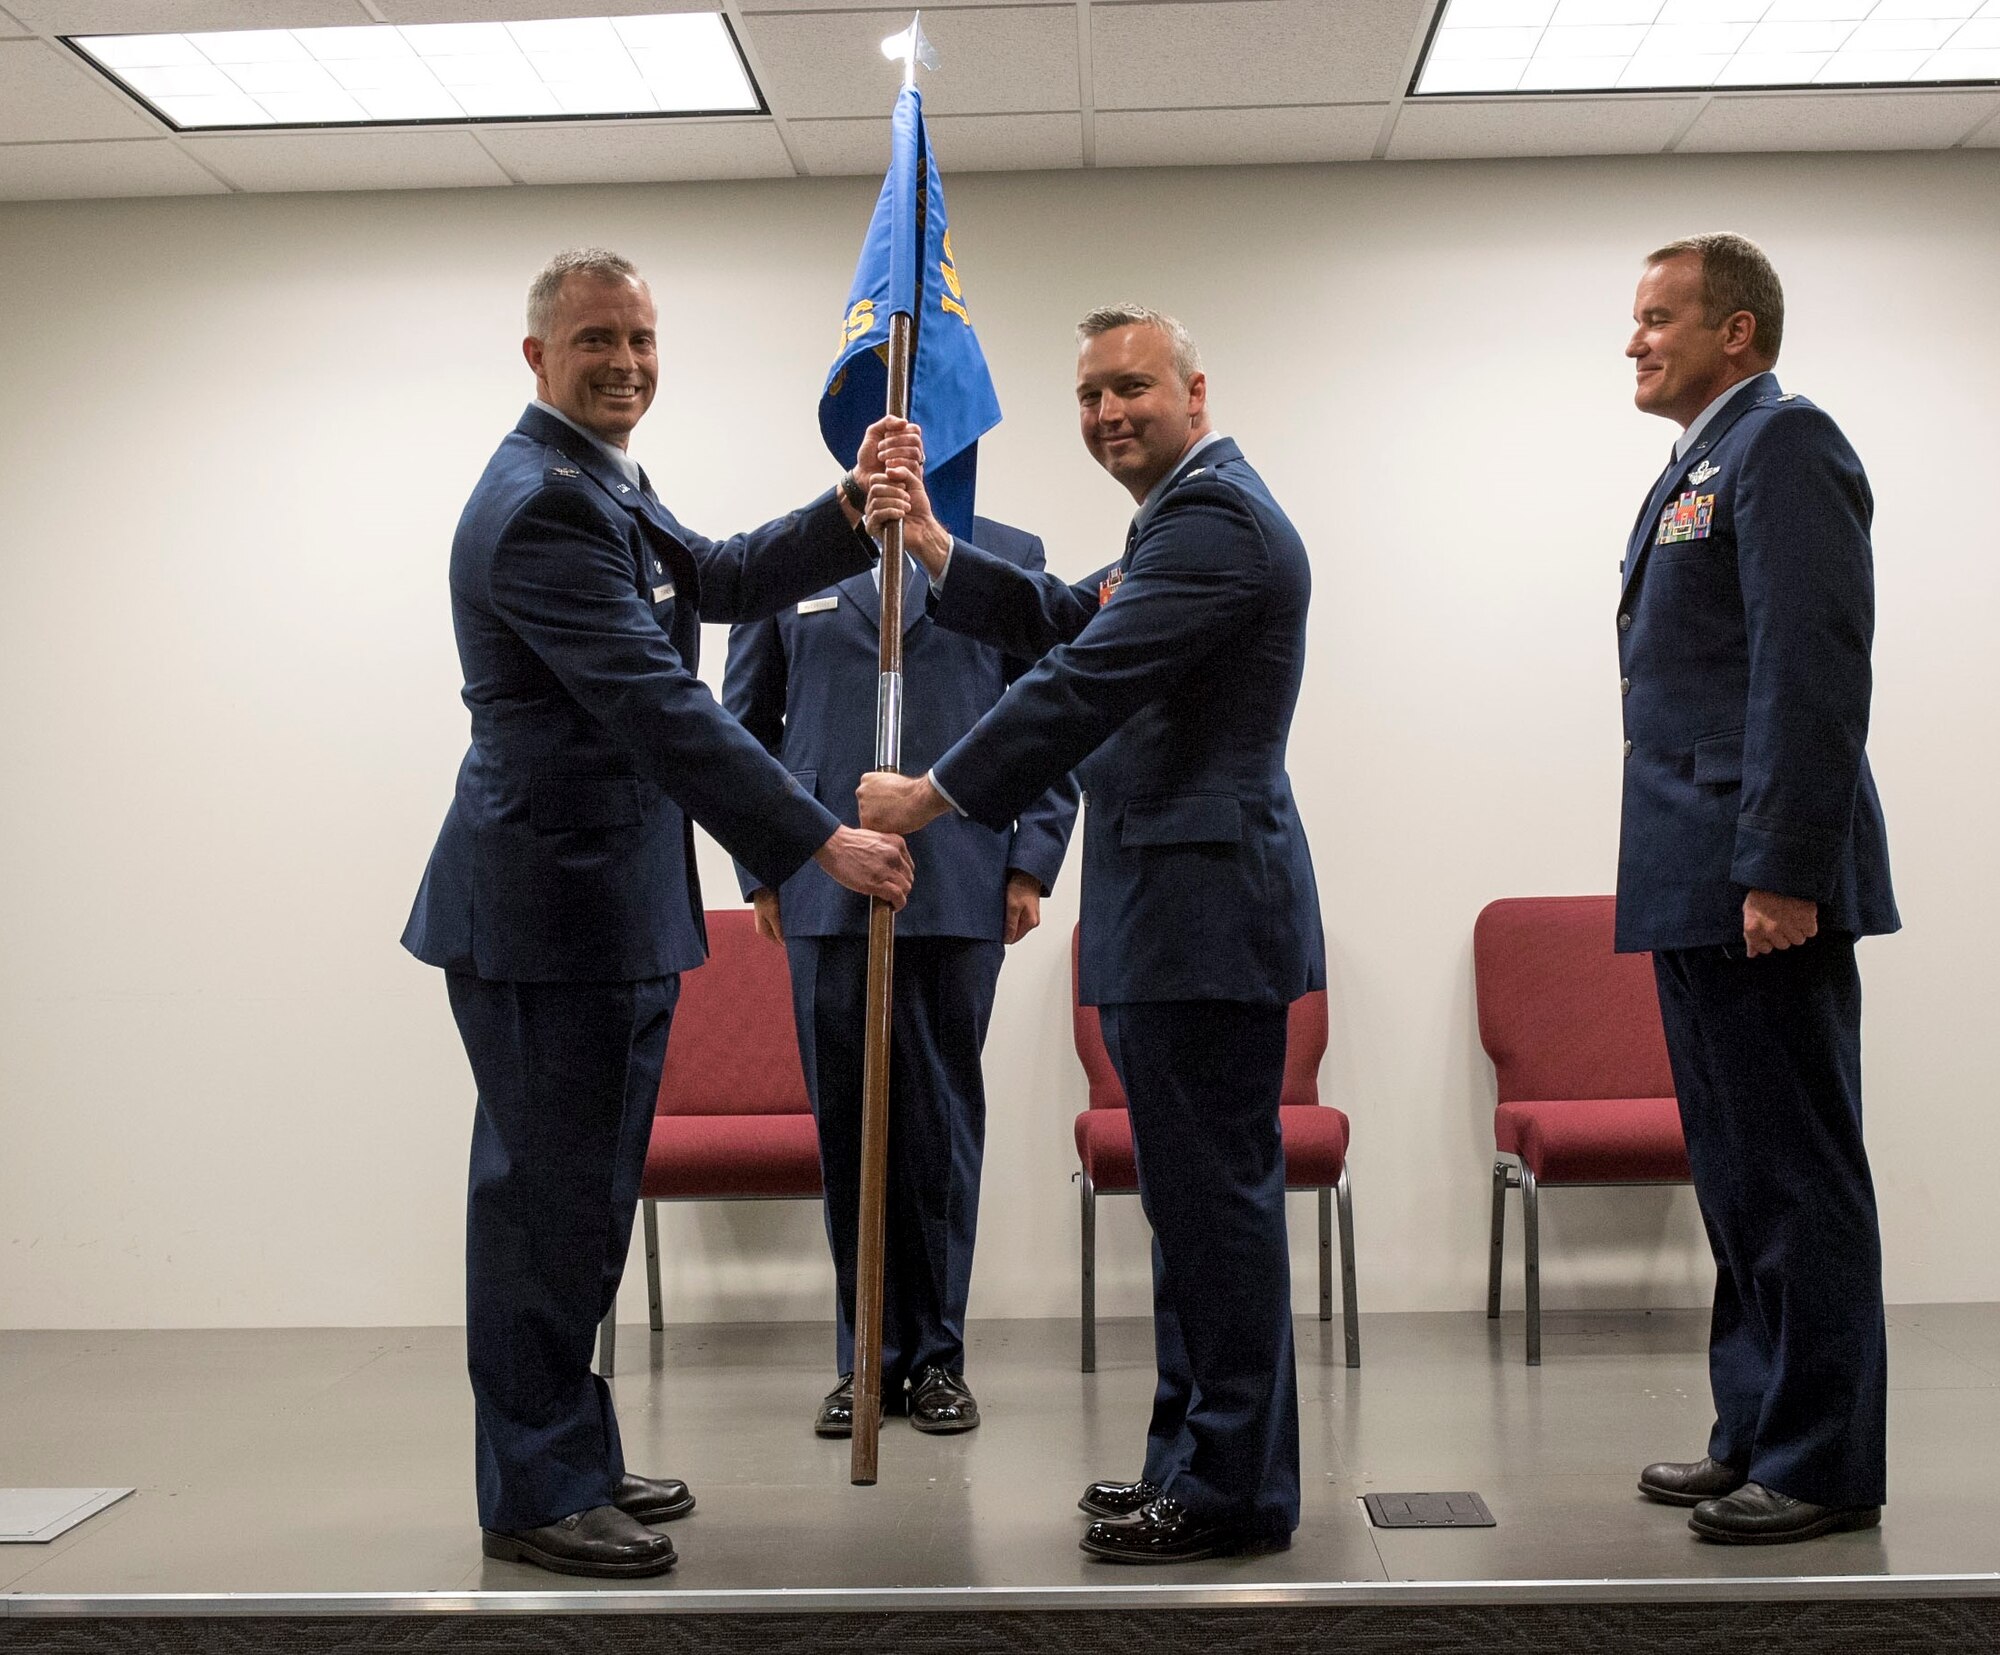 Colorado Air National Guard Col. Brian D. Turner, commander, 140th Operations Group, presents the guidon to Lt. Col. Jeremiah S. Tucker as he assumes command of the 140th Operations Support Squadron (OSS),  June 5, 2016, Buckley Air Force Base, Aurora, Colo. The 140 OSS was previously under the command of Lt. Col. Scott D. Van Beek (right), special projects officer, 140 Wing Plans.  (U.S. Air National Guard photo by Staff Sgt. Michelle Y. Alvarez-Rea)